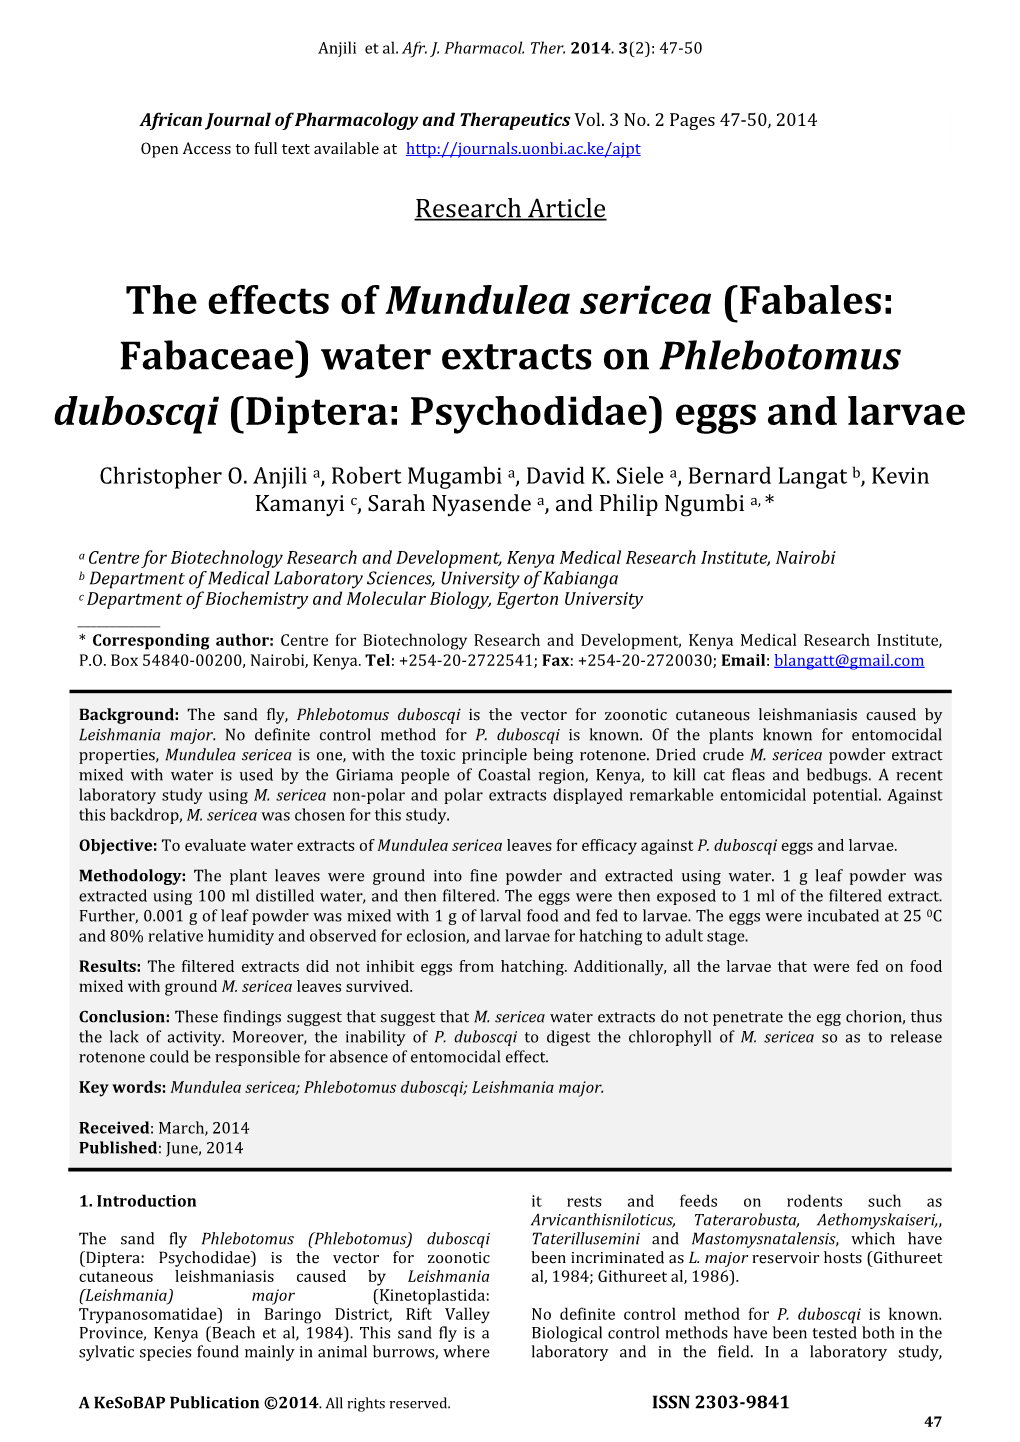 The Effects of Mundulea Sericea (Fabales: Fabaceae) Water Extracts on Phlebotomus Duboscqi (Diptera: Psychodidae) Eggs and Larvae